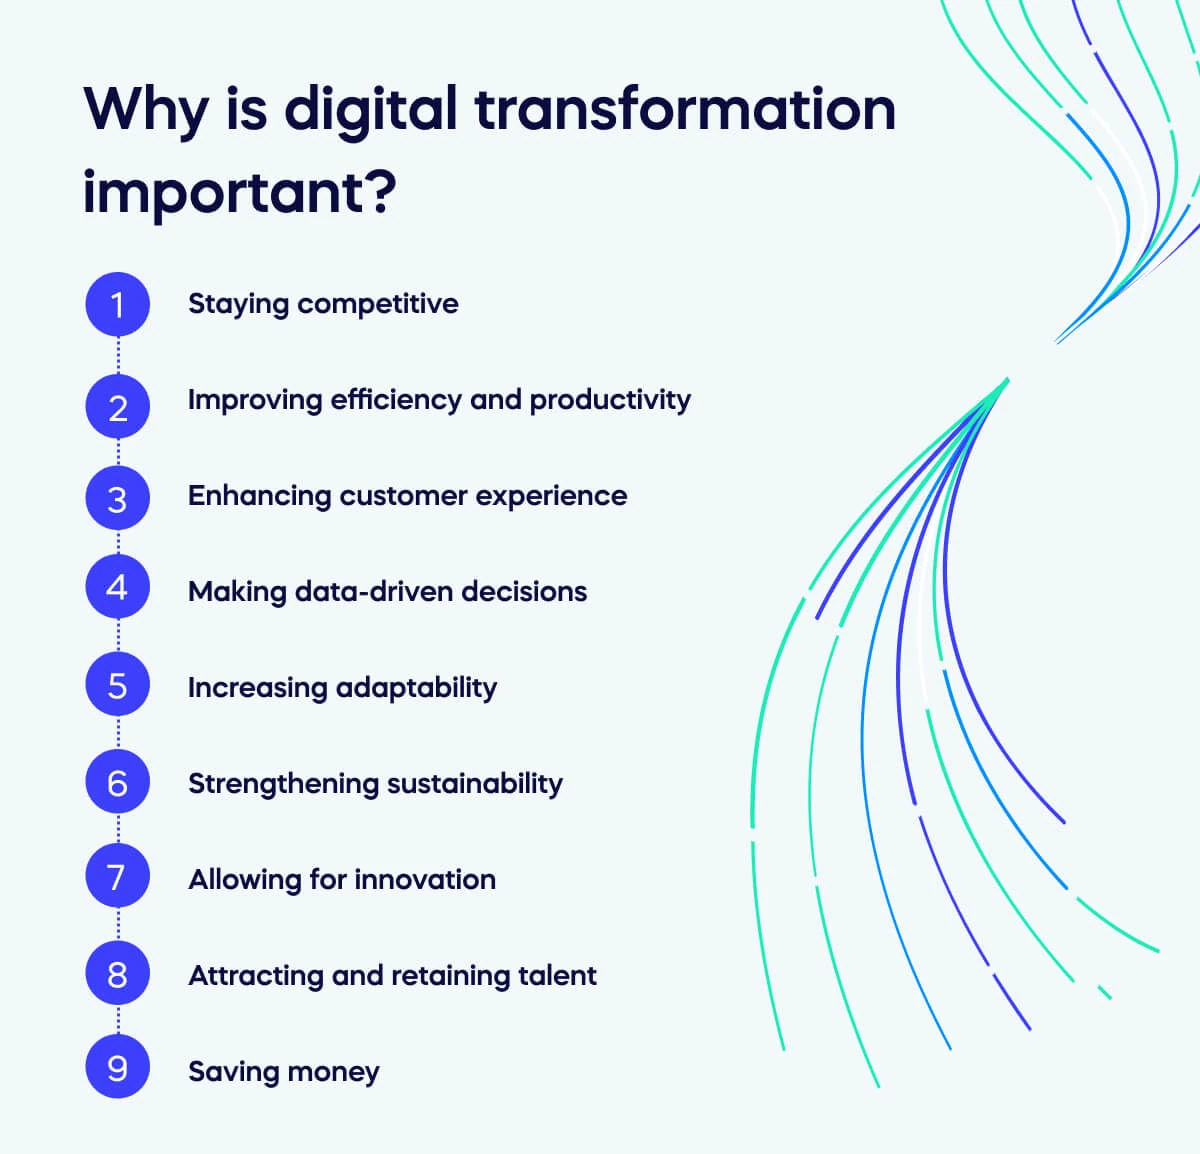 Why is digital transformation important